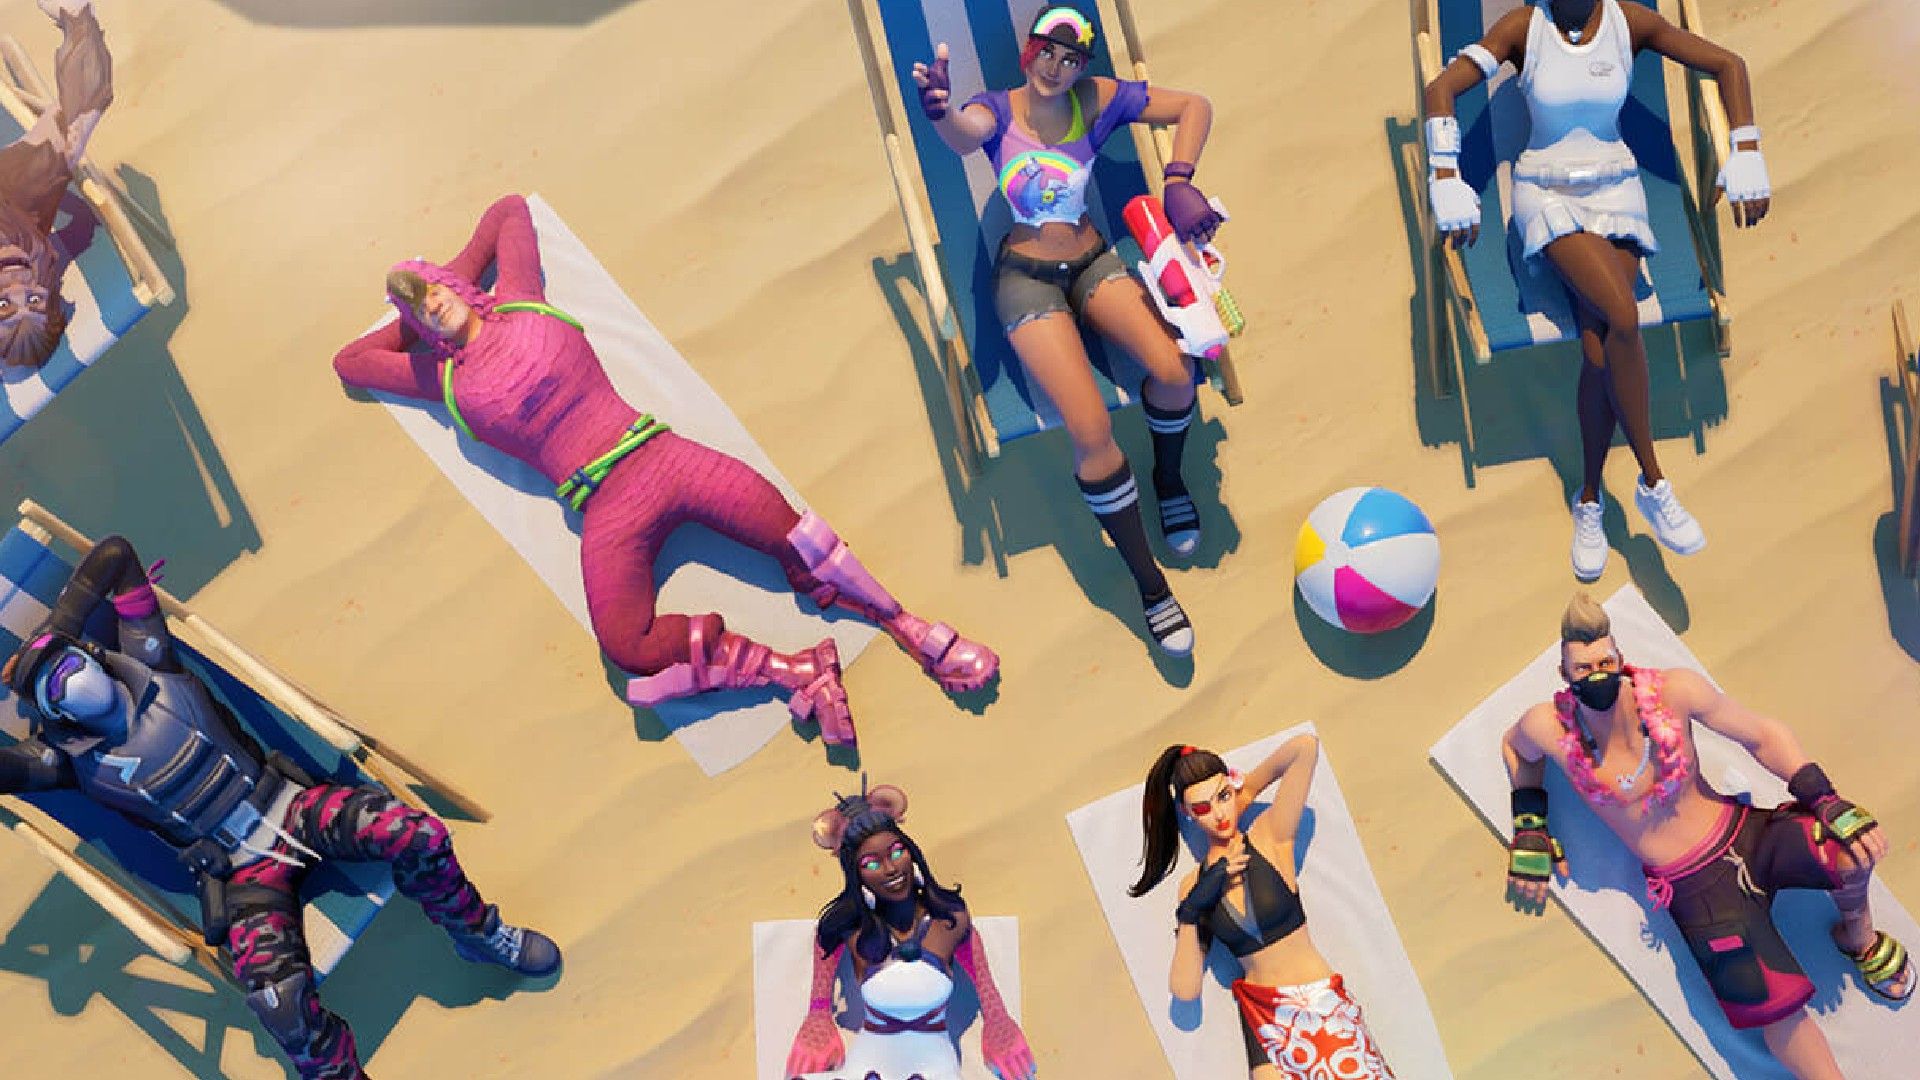 A group of Fortnite characters sunbathing on chairs and towels for Summer event